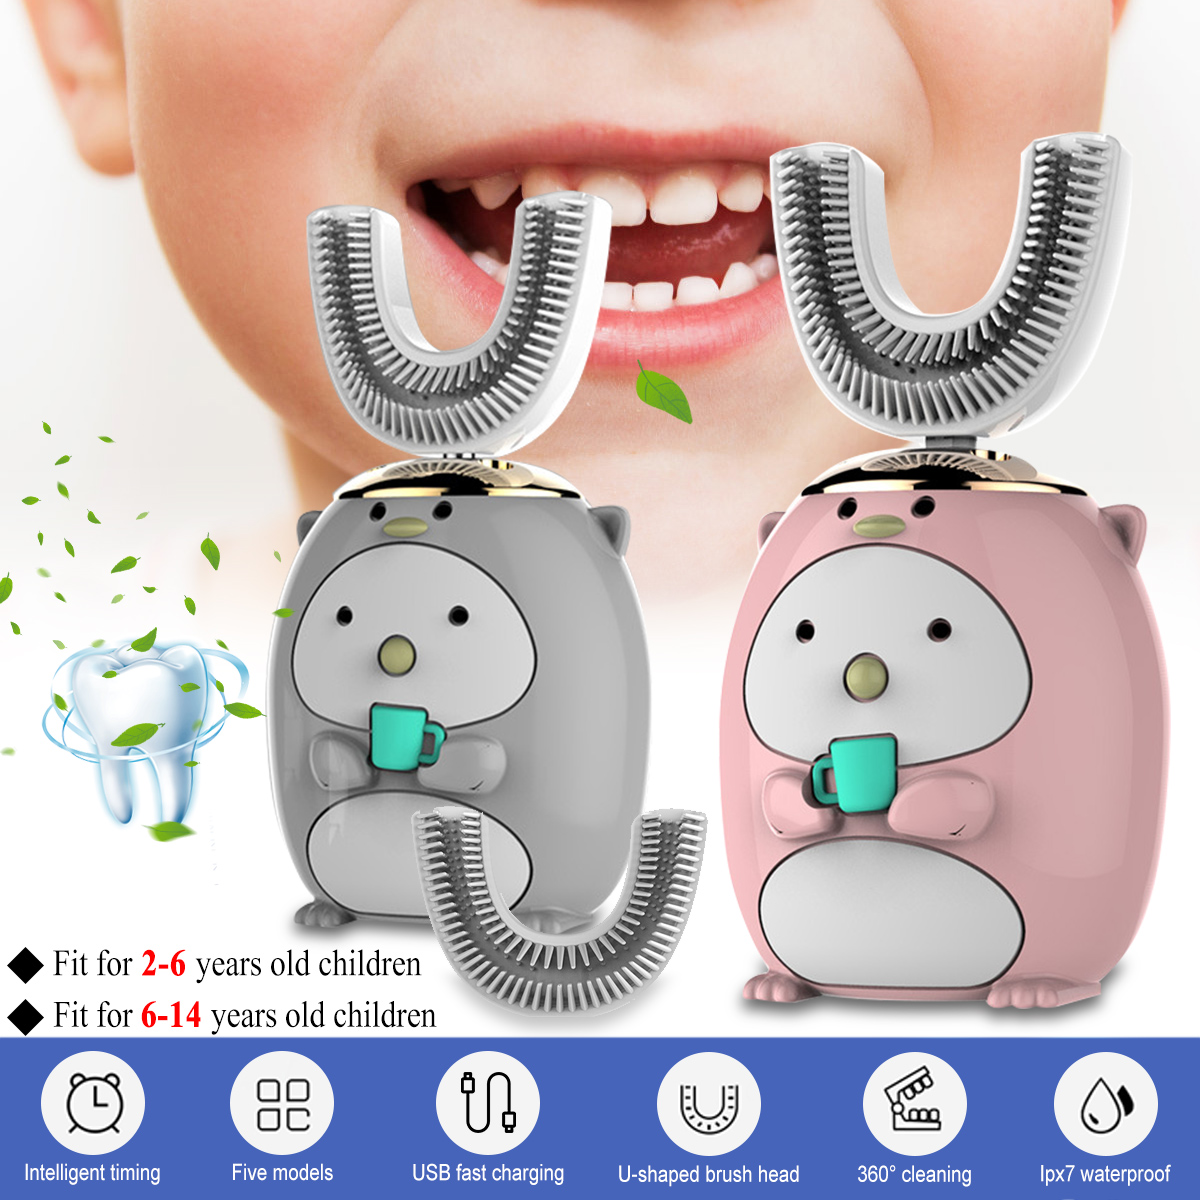 Silicone-U-shaped-Electric-Toothbrush-Intelligent-USB-Charging-Portable-Toothbrush-1767983-2